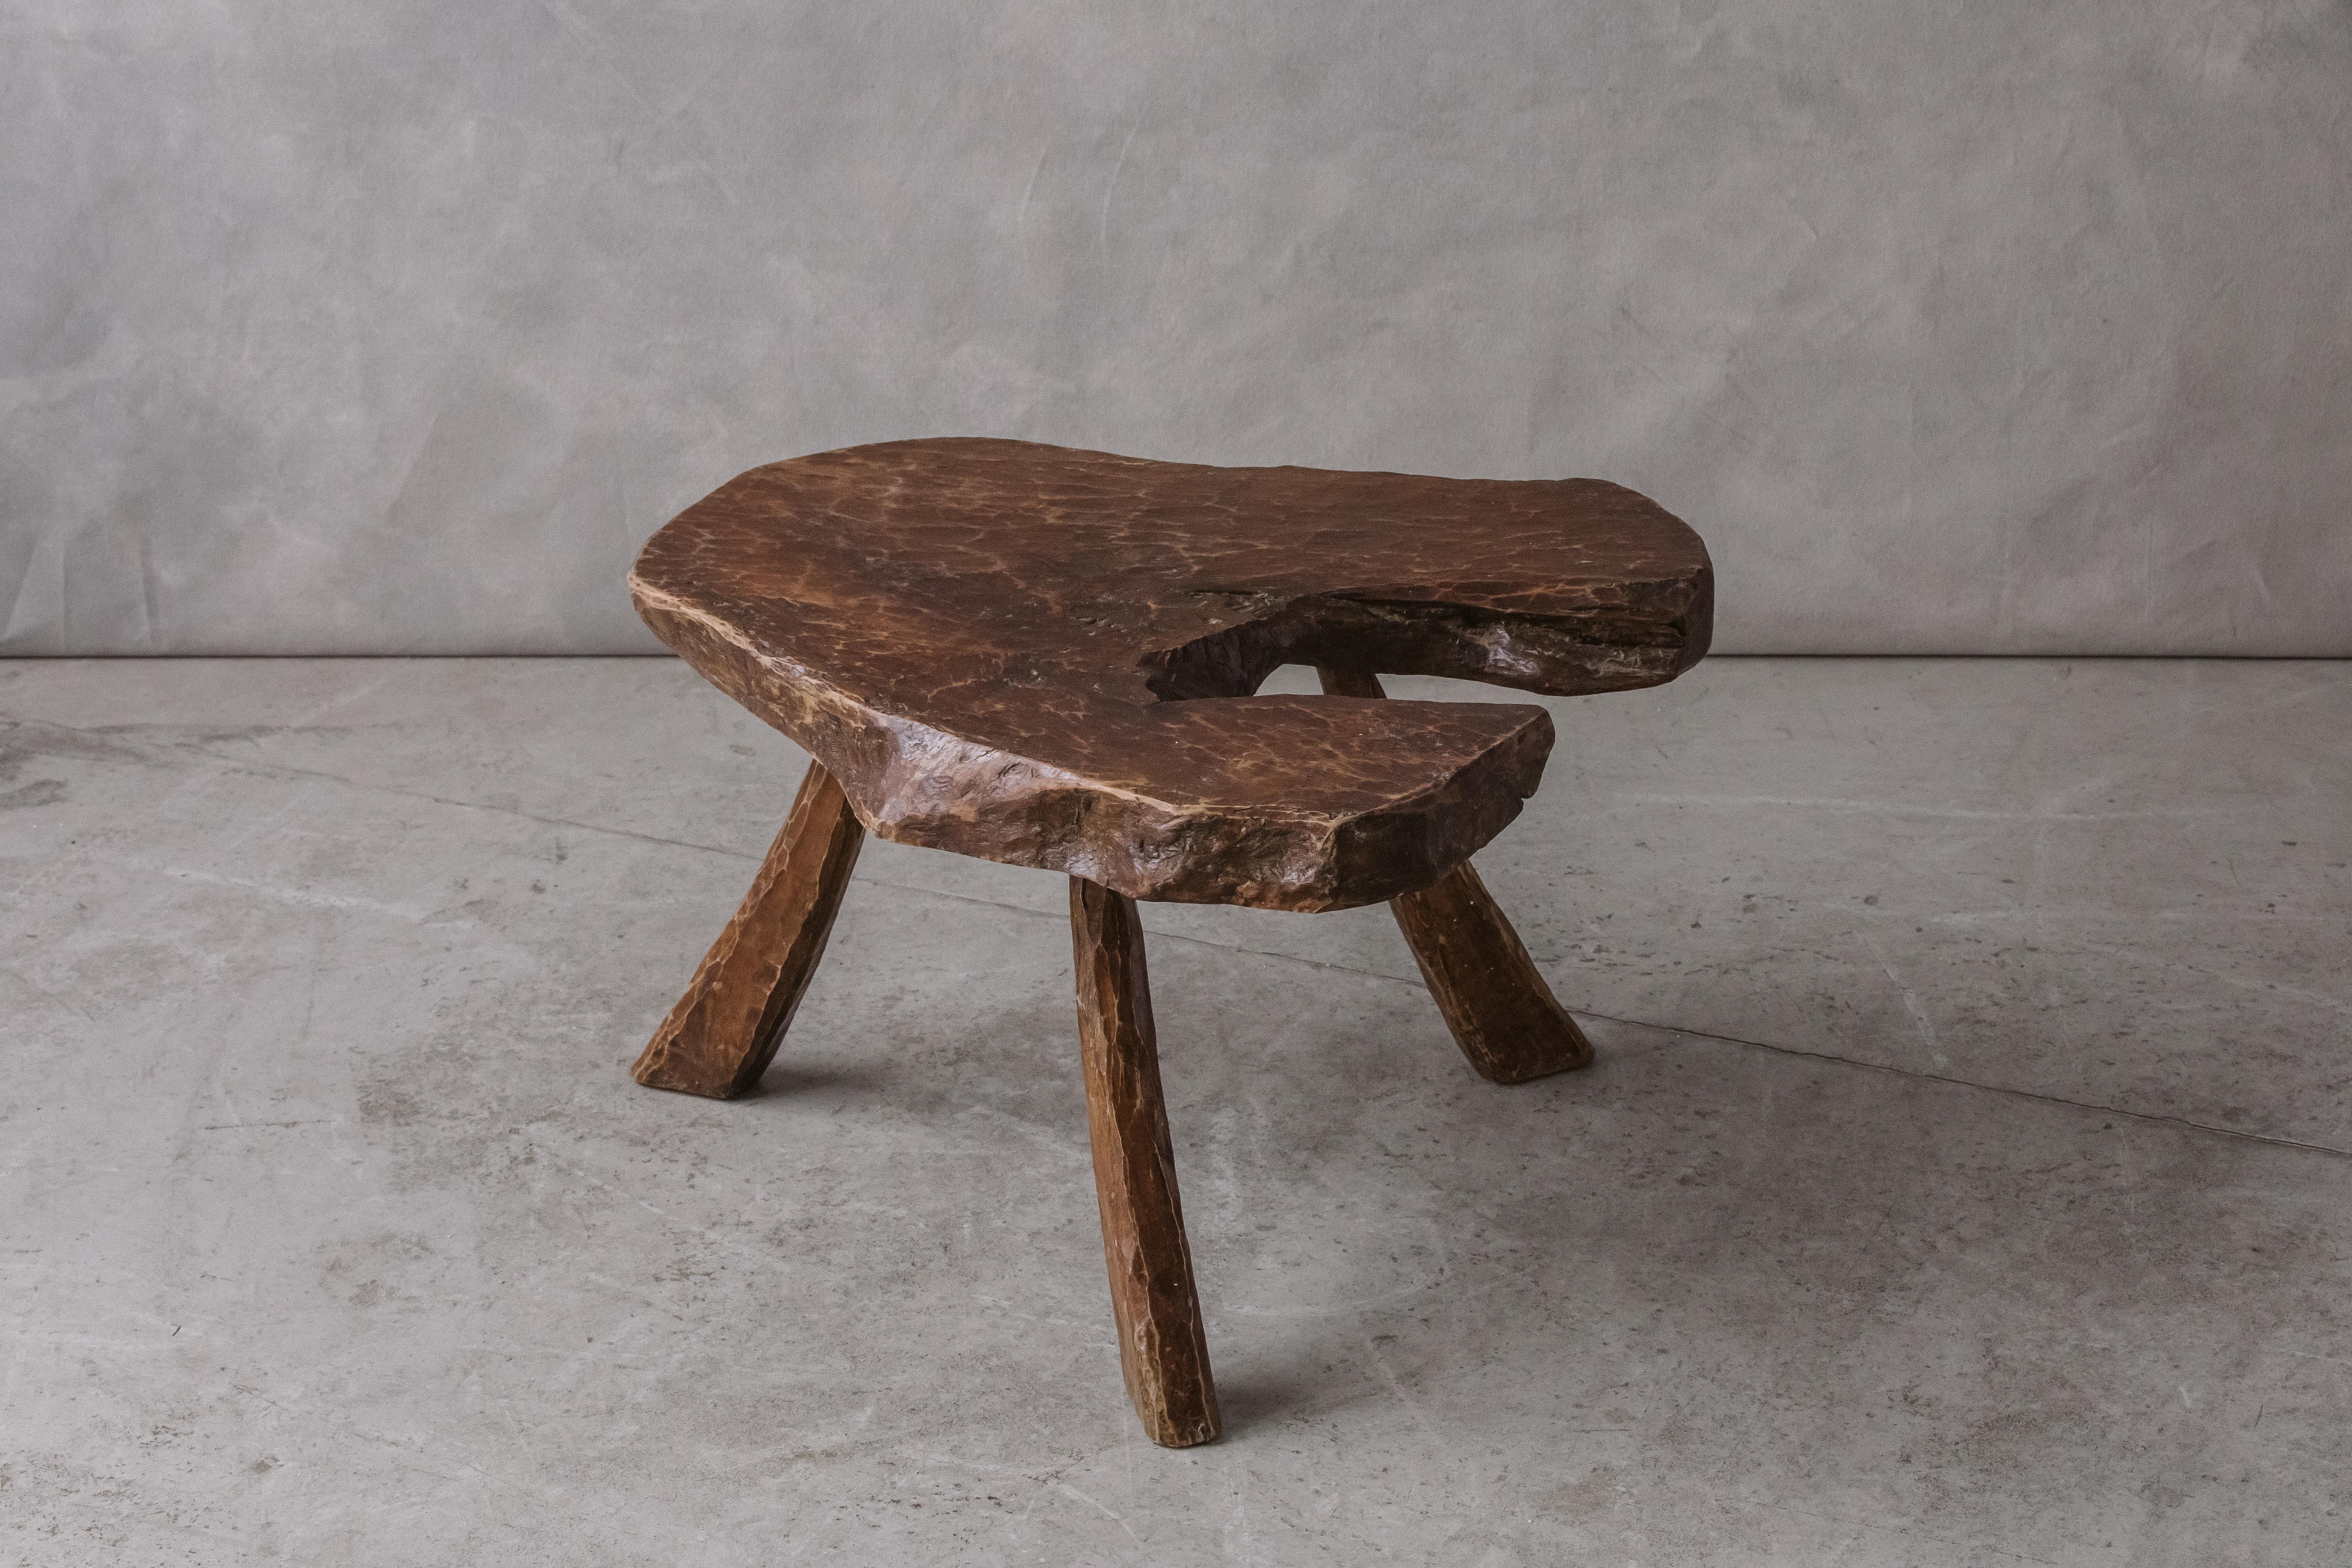 Vintage Live Edge Side Table From France, circa 1960. Hand carved legs and top. Light wear and use.

We prefer to speak directly with our clients. So, If you have any questions or would like to know more please give us a call or drop us a line. We